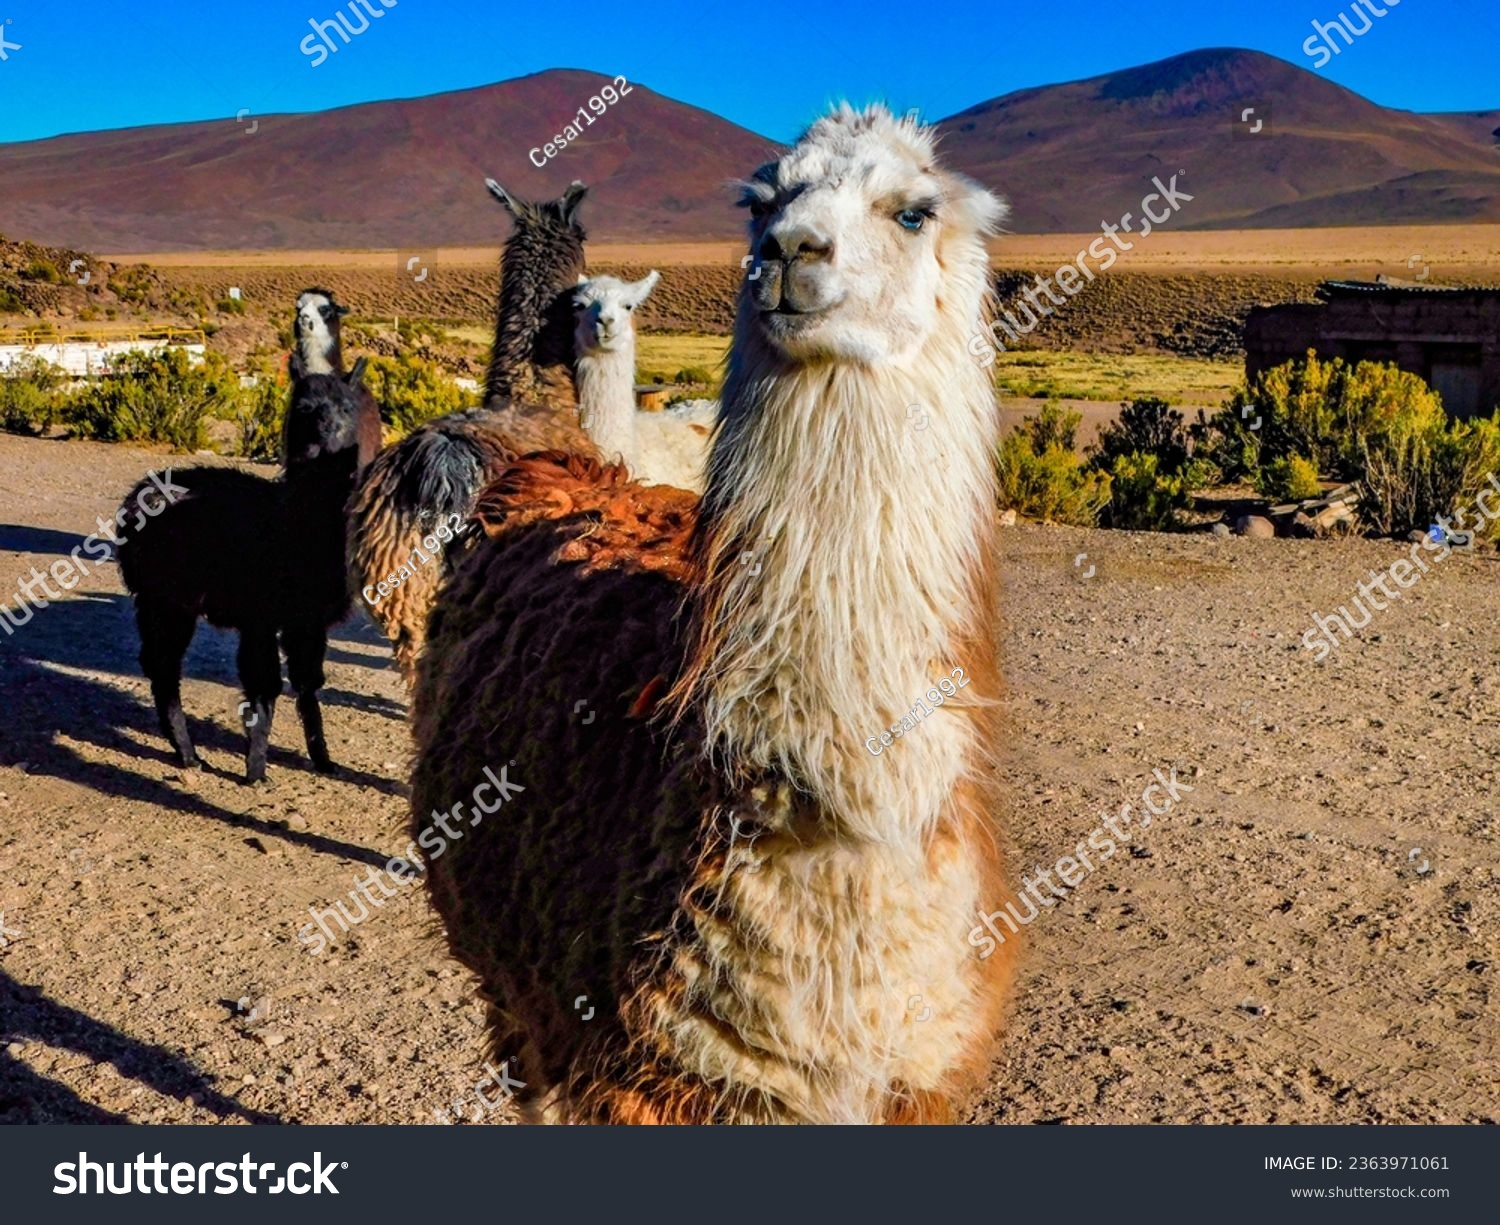 Llamas (Lama glama) are domesticated South American camelids that are known for their economic and cultural importance in the Andean regions of South America. #2363971061